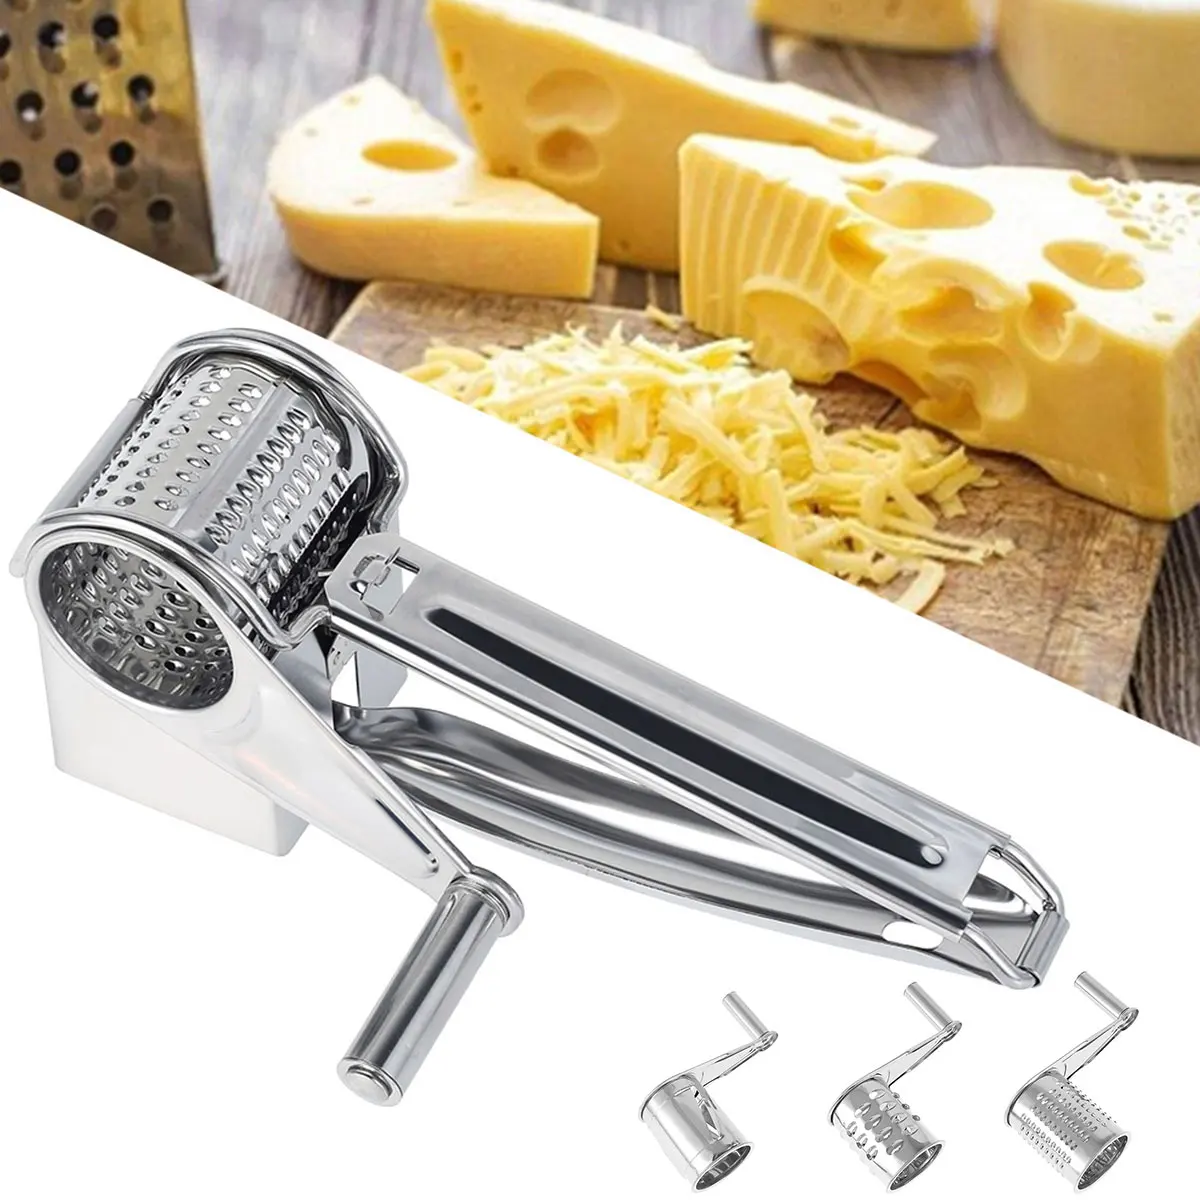  Cheese Grater, Handheld Rotary Cheese Grater, Small